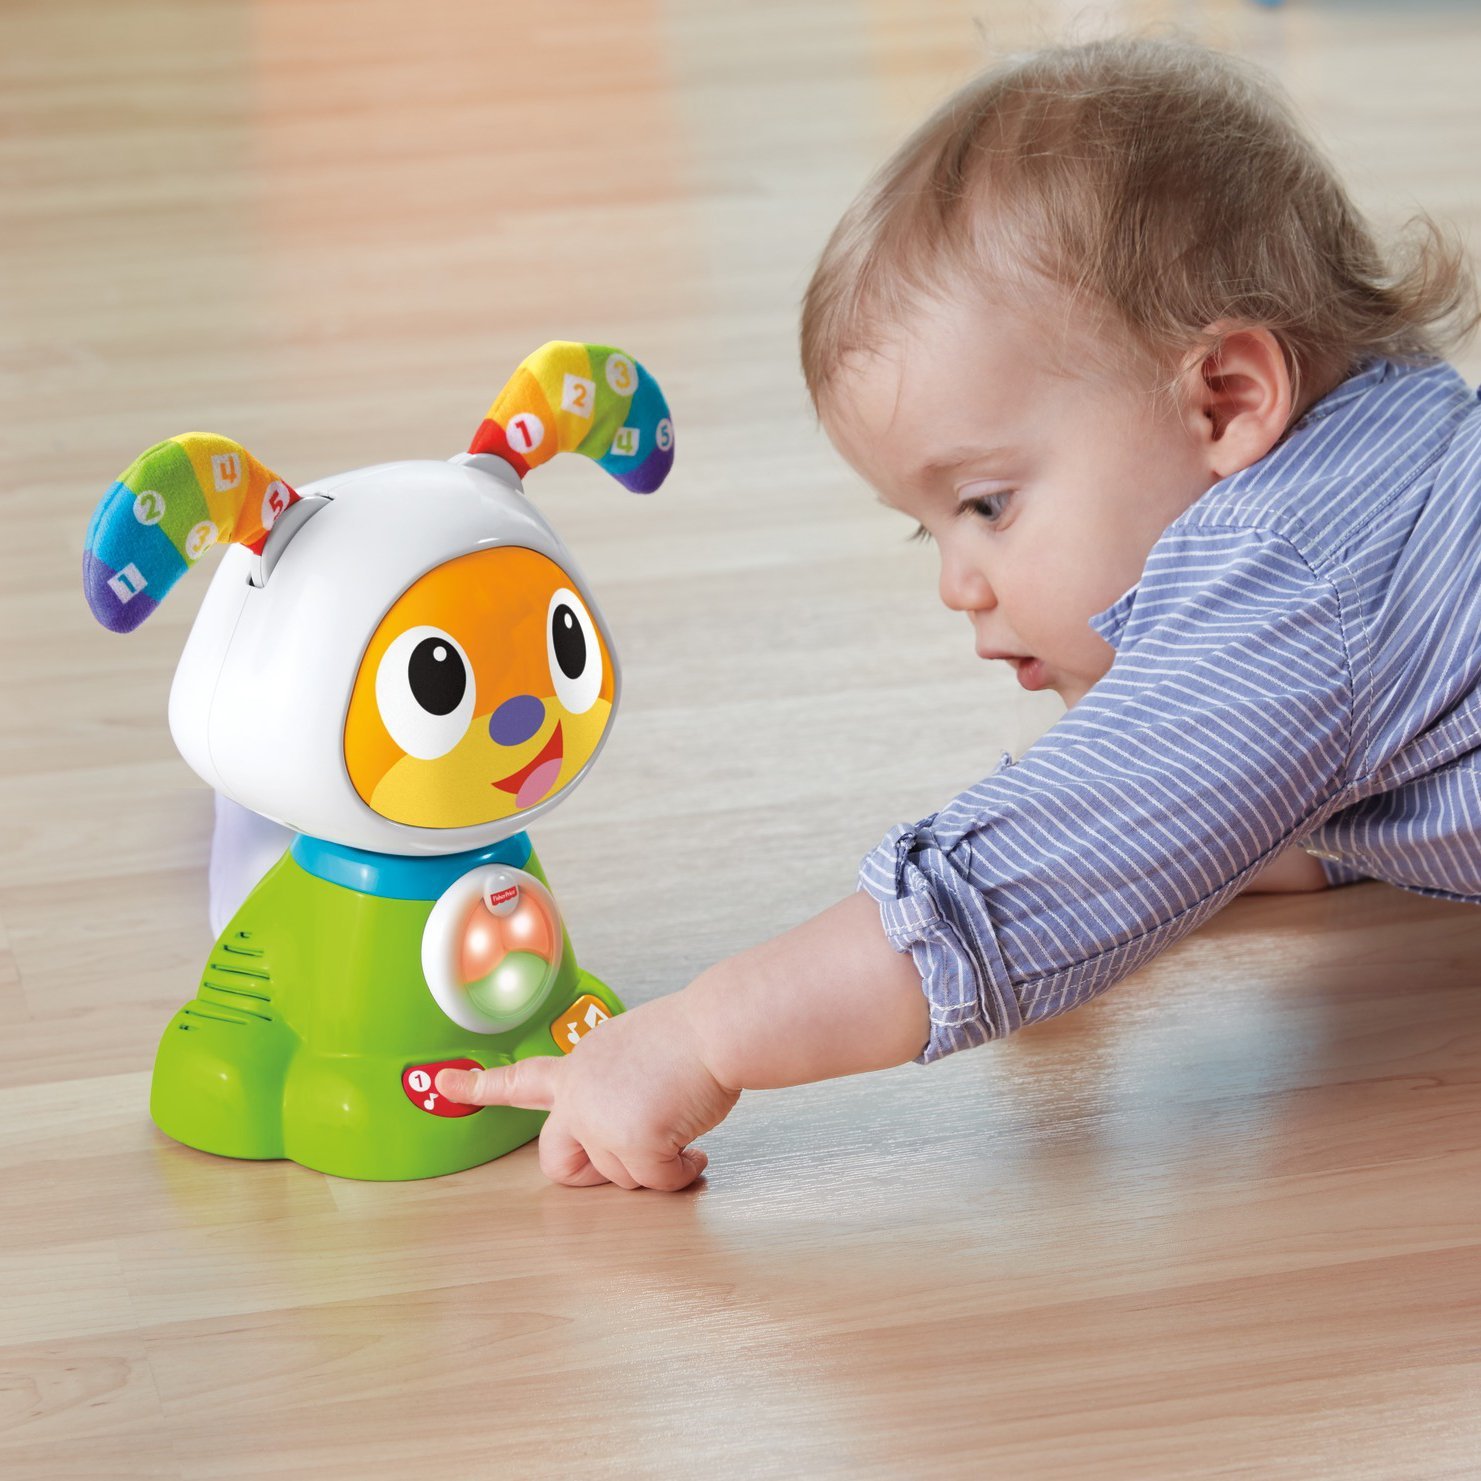 Fisher-Price Bright Beats Dance & Move BeatBowWow $14.69! (Lowest Price We’ve Seen)